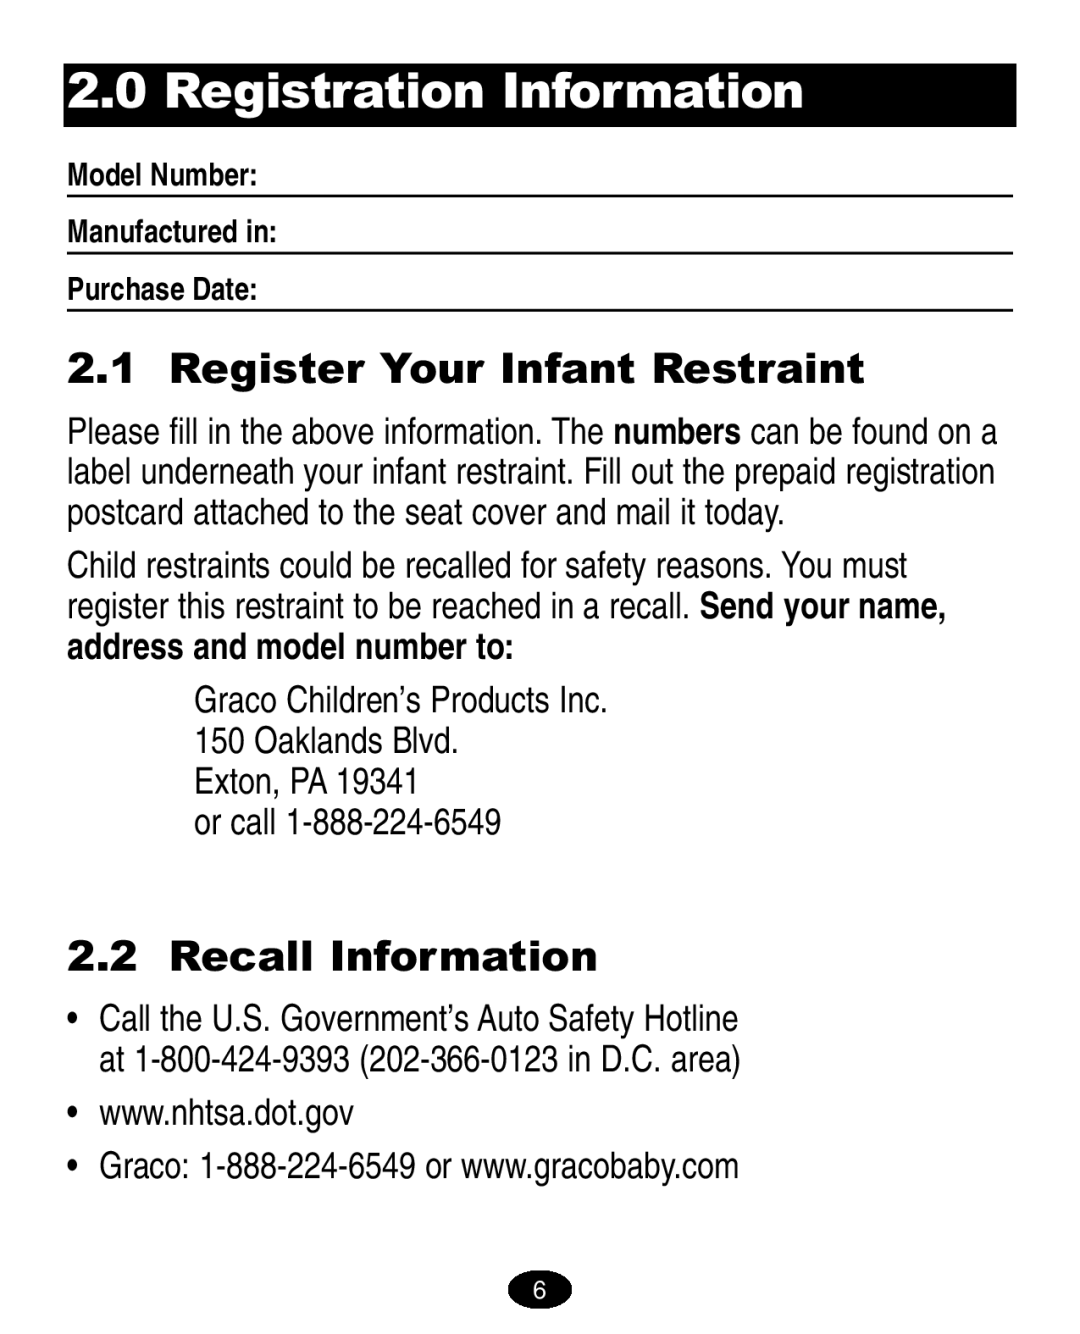 Graco ISPA005AA manual Registration Information, Register Your Infant Restraint, Recall Information, Exton, PA or call 